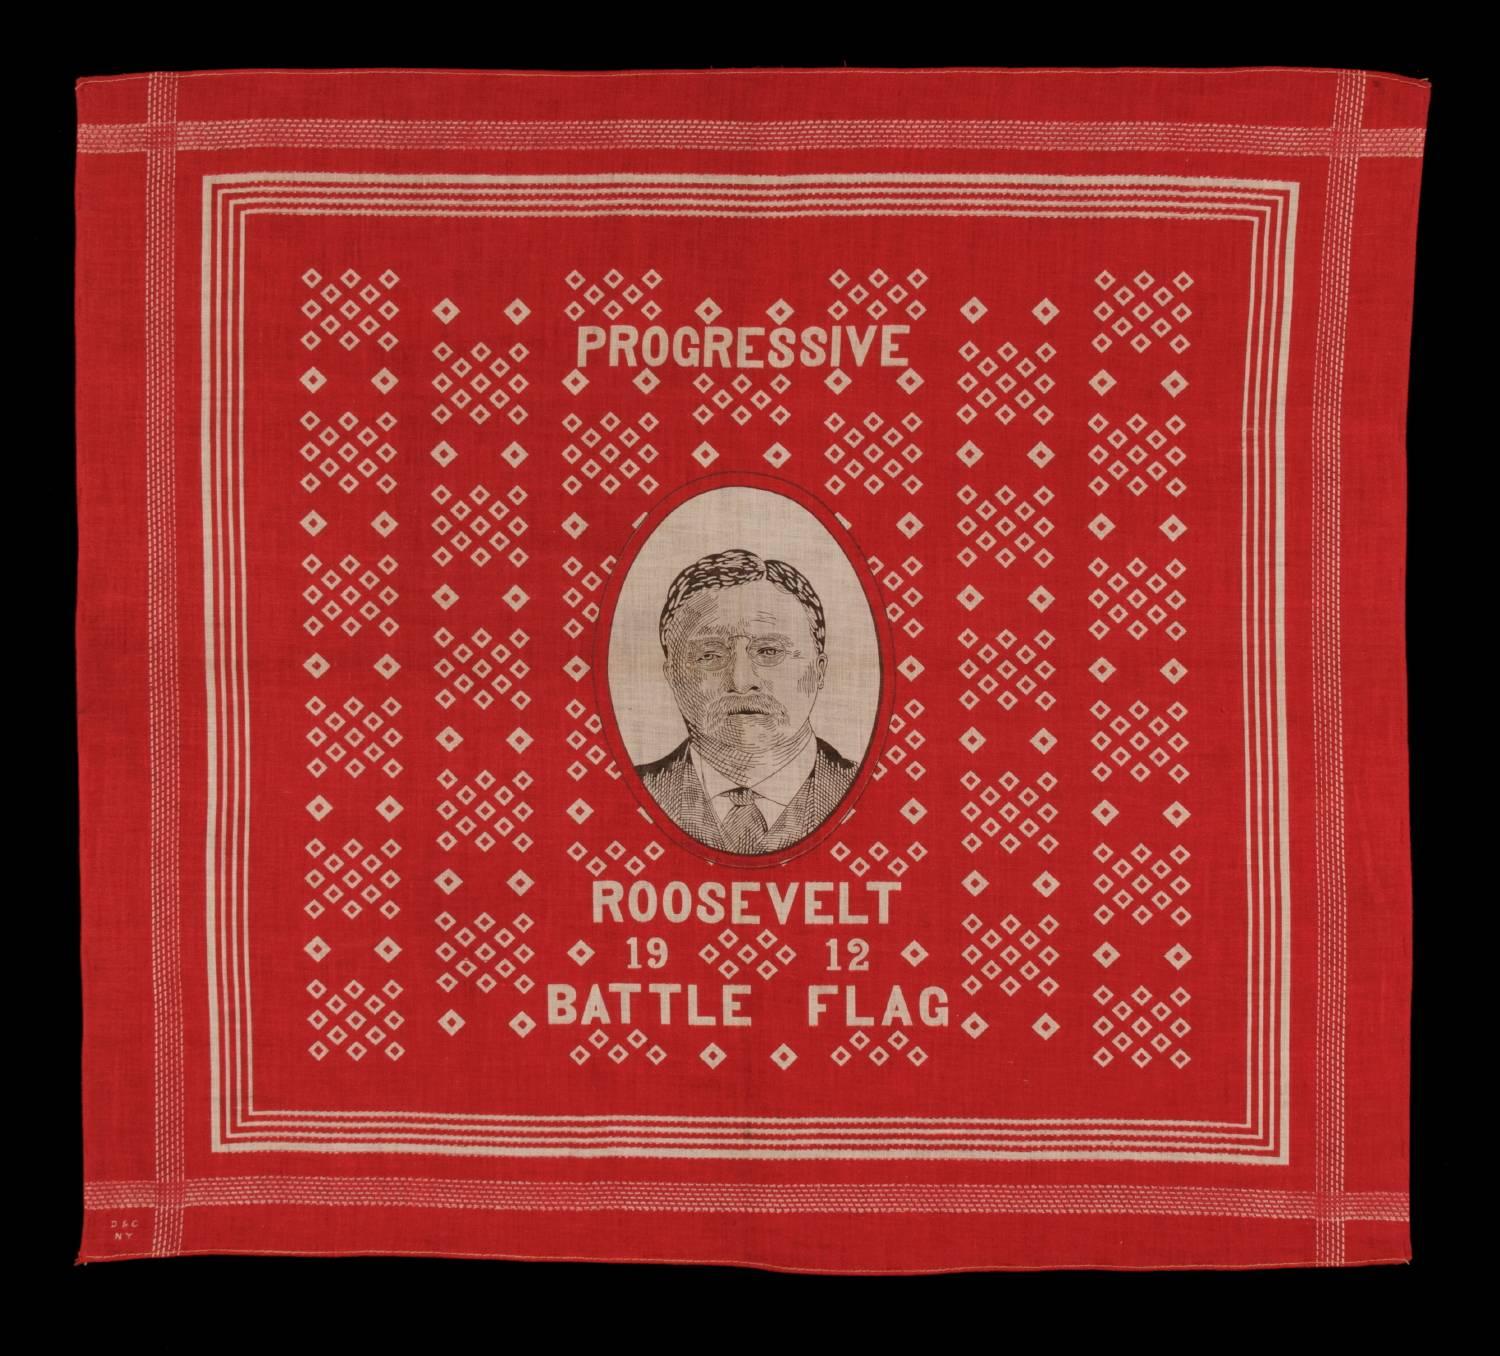 ROOSEVELT BATTLE FLAG KERCHIEF, MADE FOR THE 1912 PRESIDENTIAL CAMPAIGN OF TEDDY ROOSEVELT, WHEN HE RAN ON THE INDEPENDENT, PROGRESSIVE PARTY TICKET, SIGNED "D&C / NY" WITH "UNDERWOOD & UNDERWOOD" IMAGE COPYRIGHT: